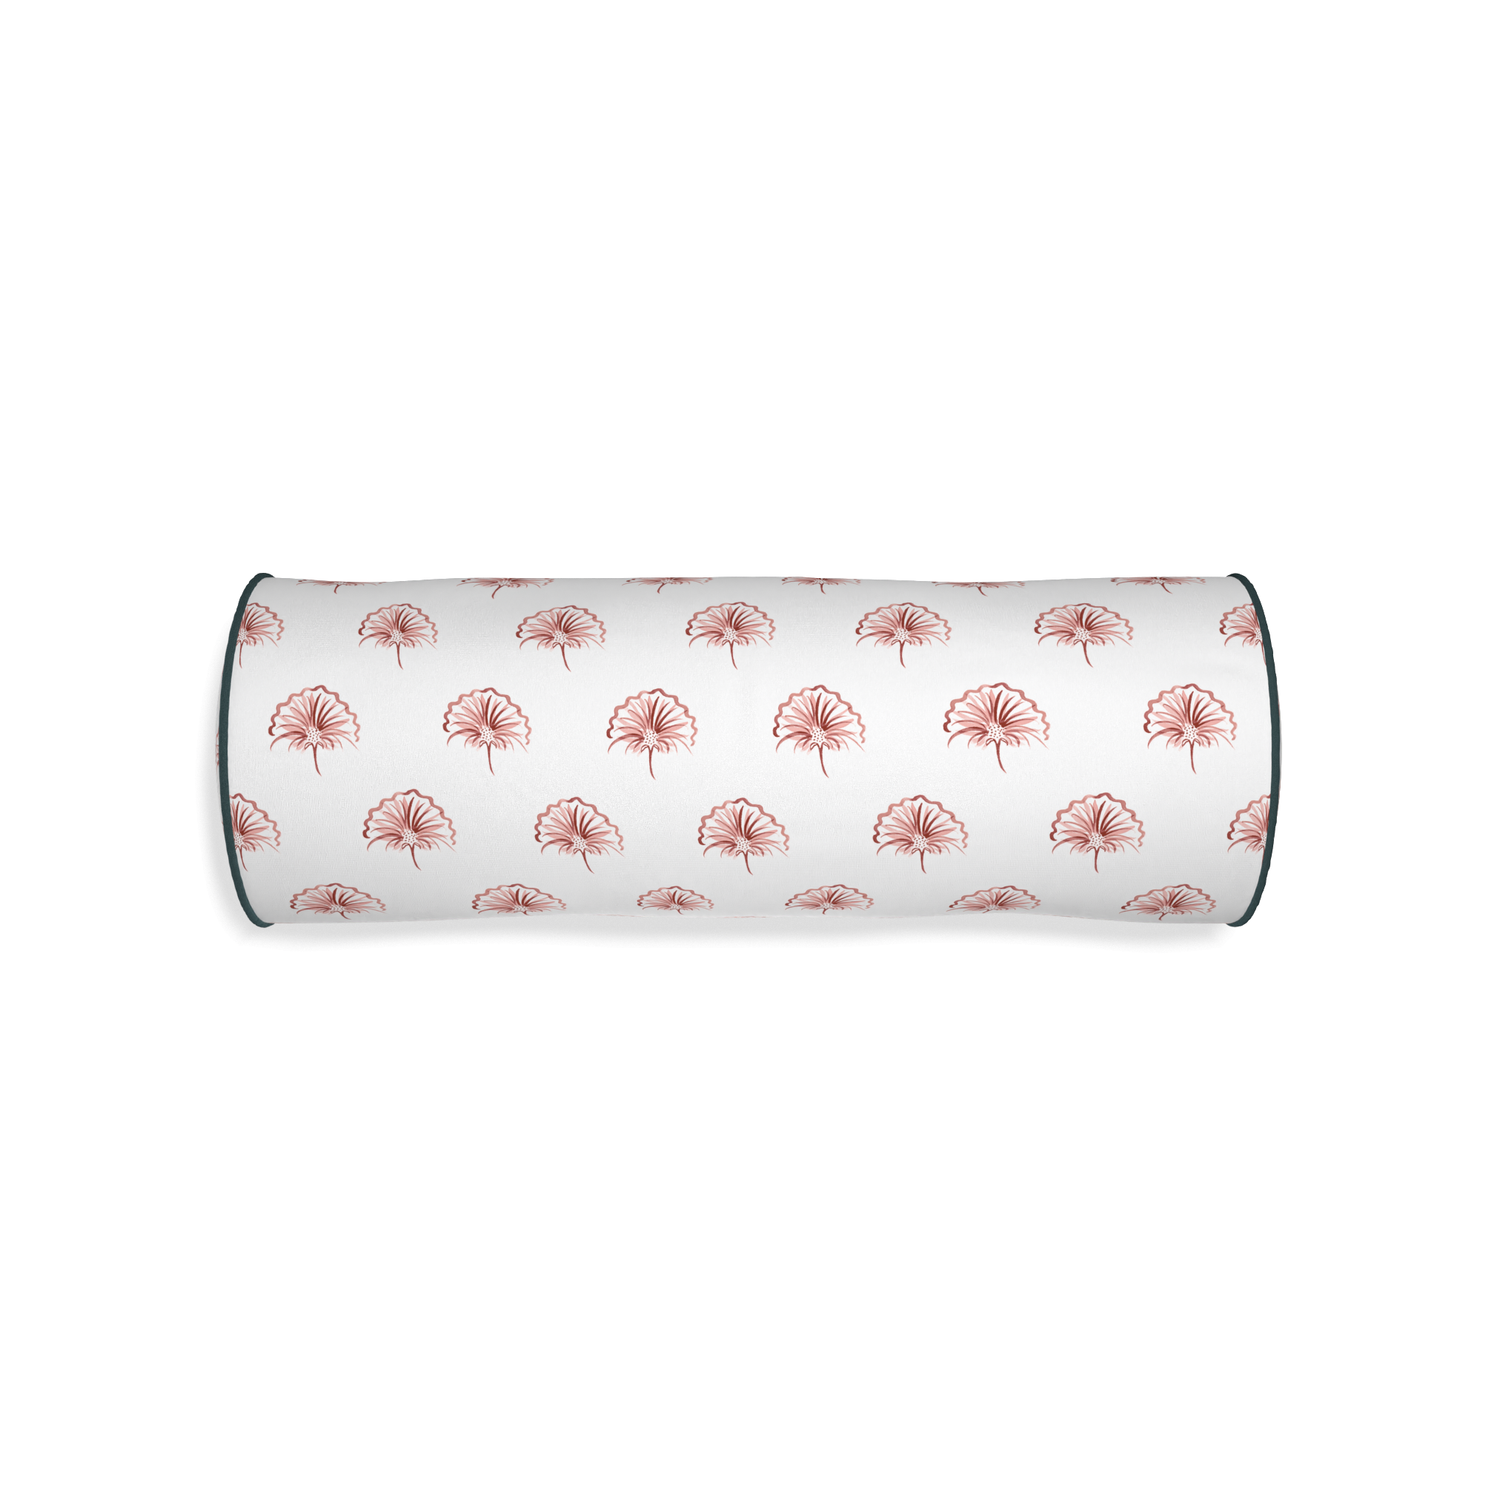 Bolster penelope rose custom floral pinkpillow with p piping on white background